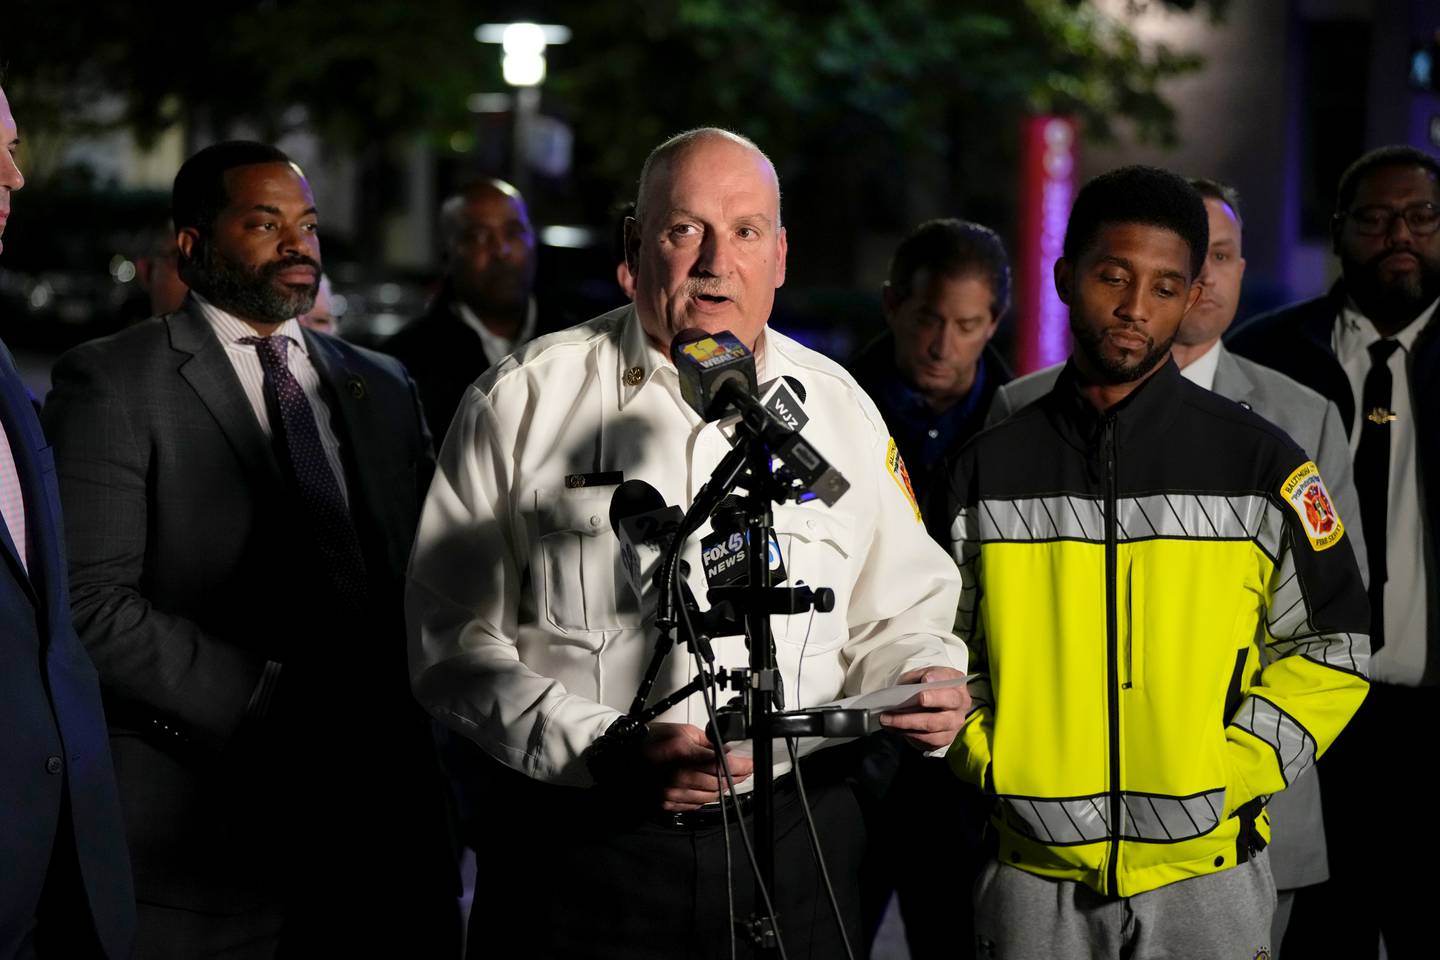 Fire Chief James Wallace makes a statement to the press with councilmen Nick Mosby (left) and Mayor Brandon Scott (right).